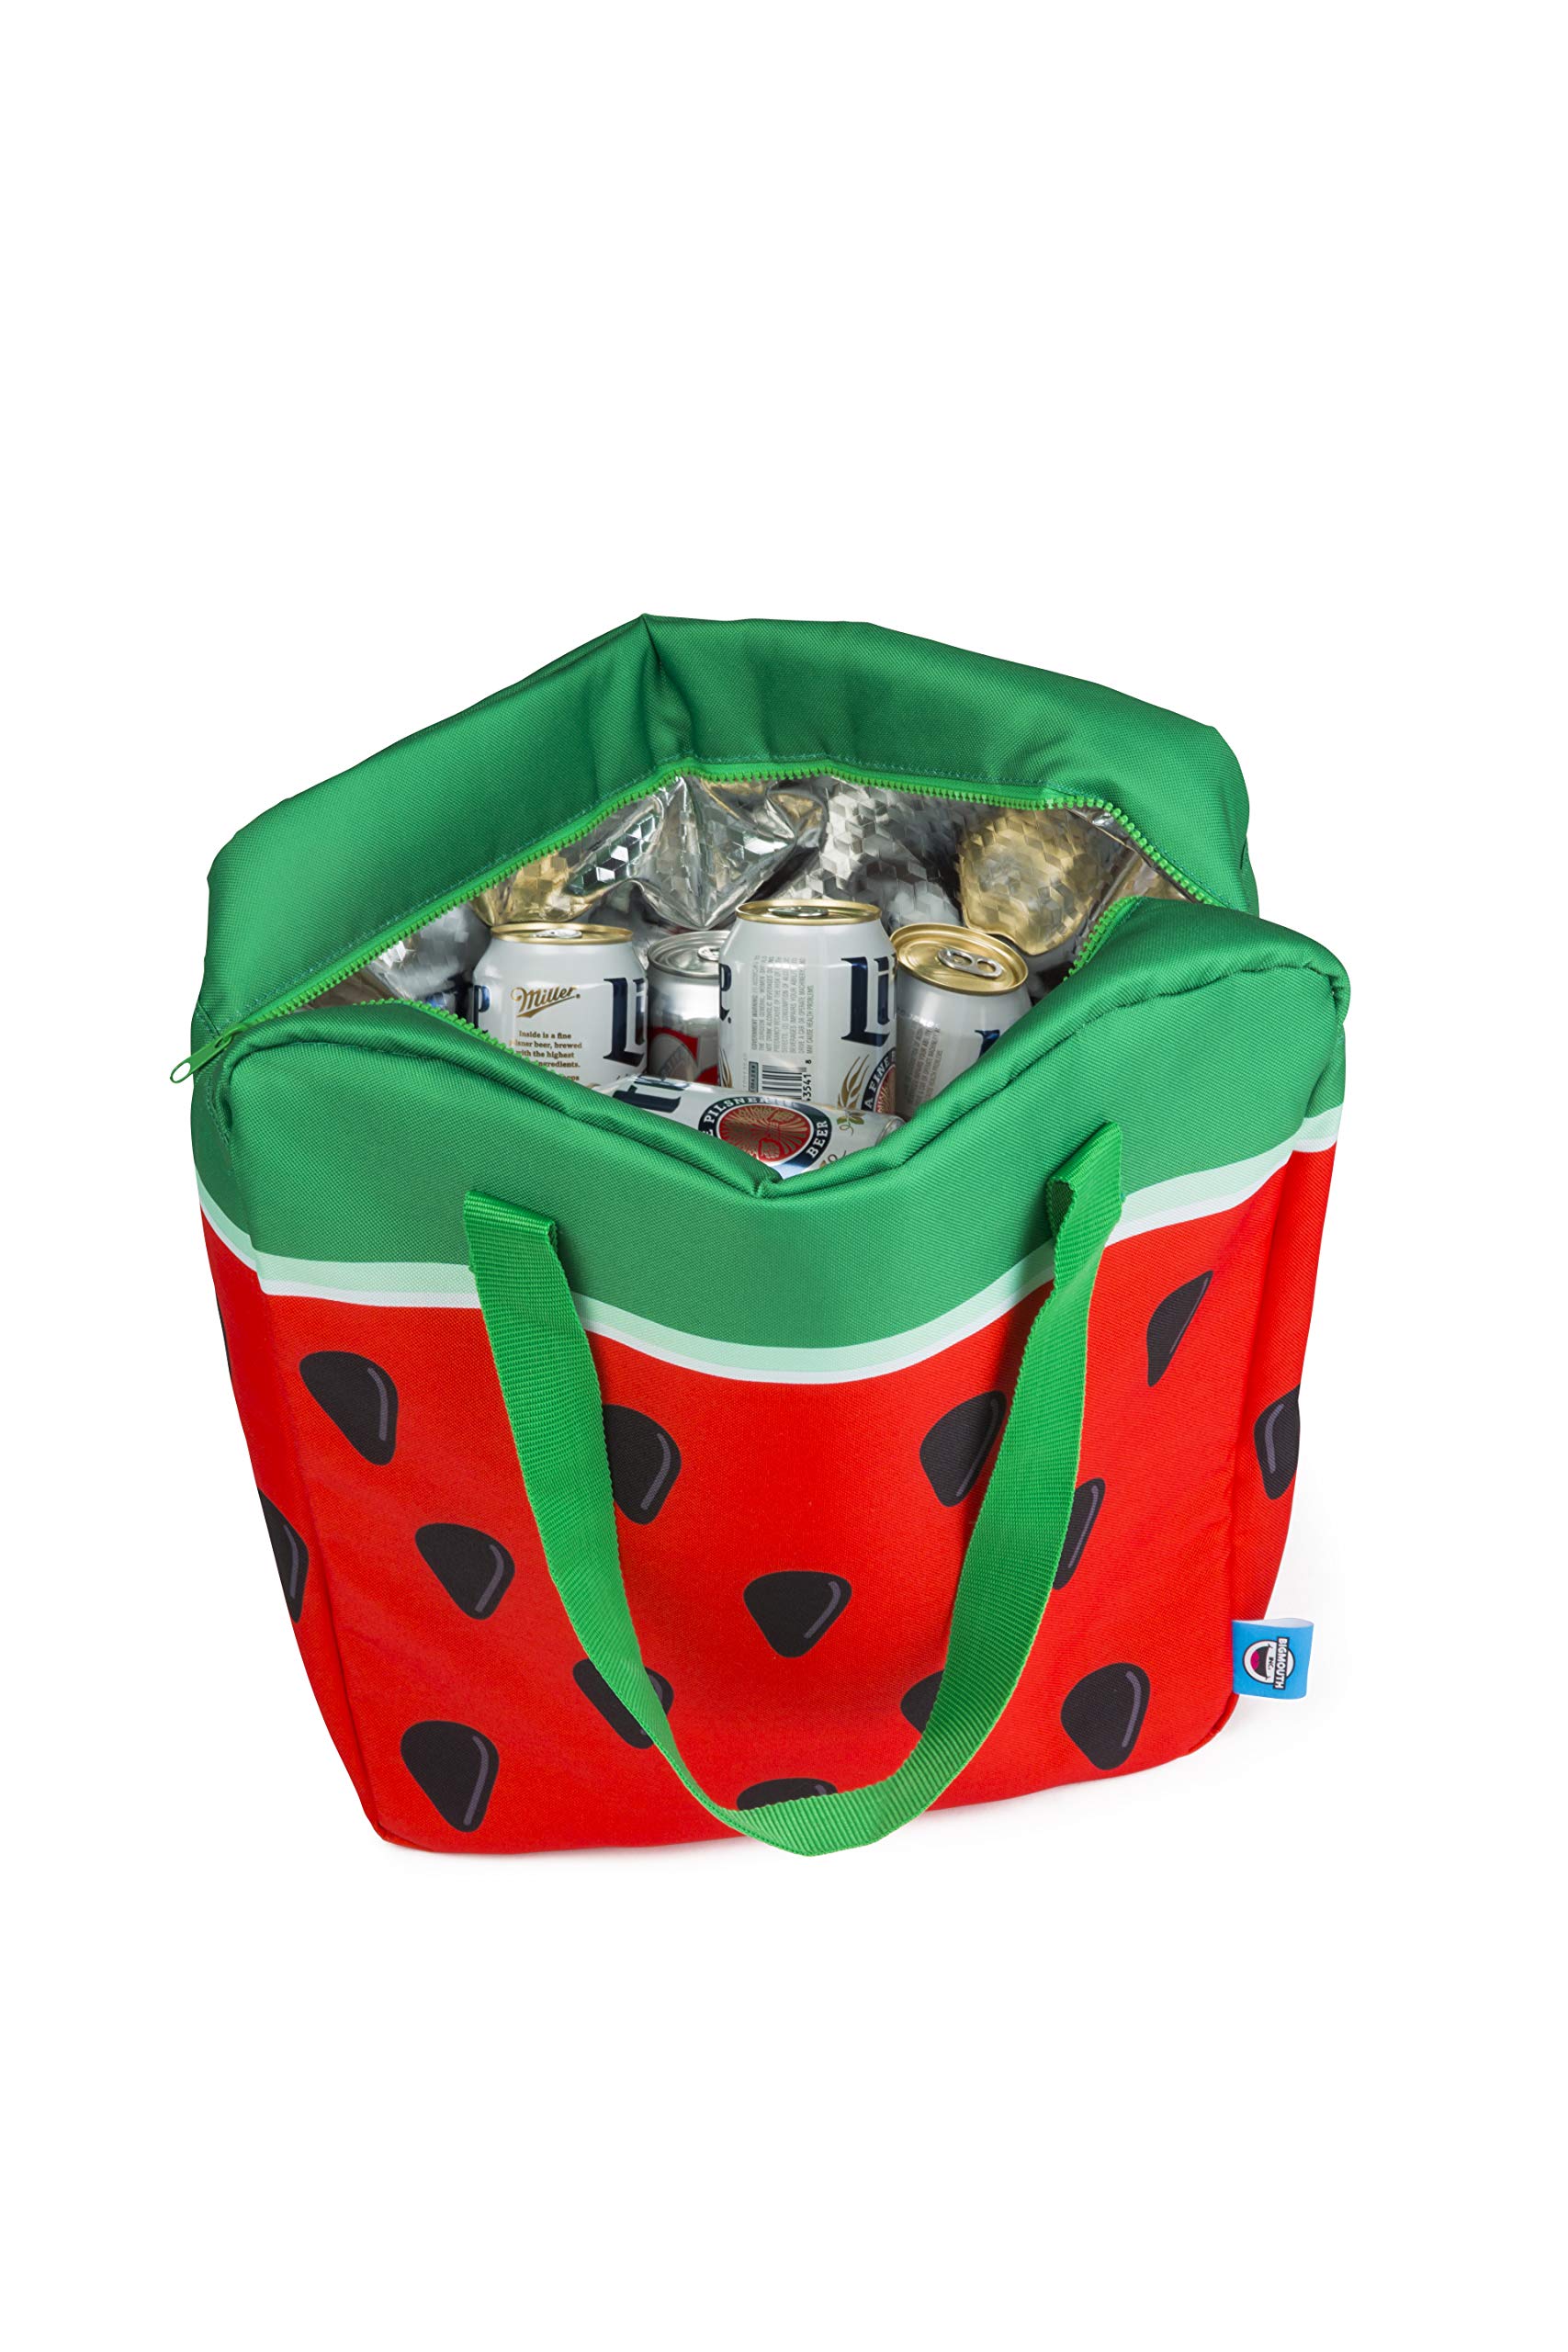 BigMouth Inc. Giant Watermelon Cooler Bag - EVA-Insulated Tote That Keeps Drinks Cool, Easy to Carry, Wide Opening for Easy Packing, Can Fit up to 12 Standard Cans or Bottles, Makes a Great Gift